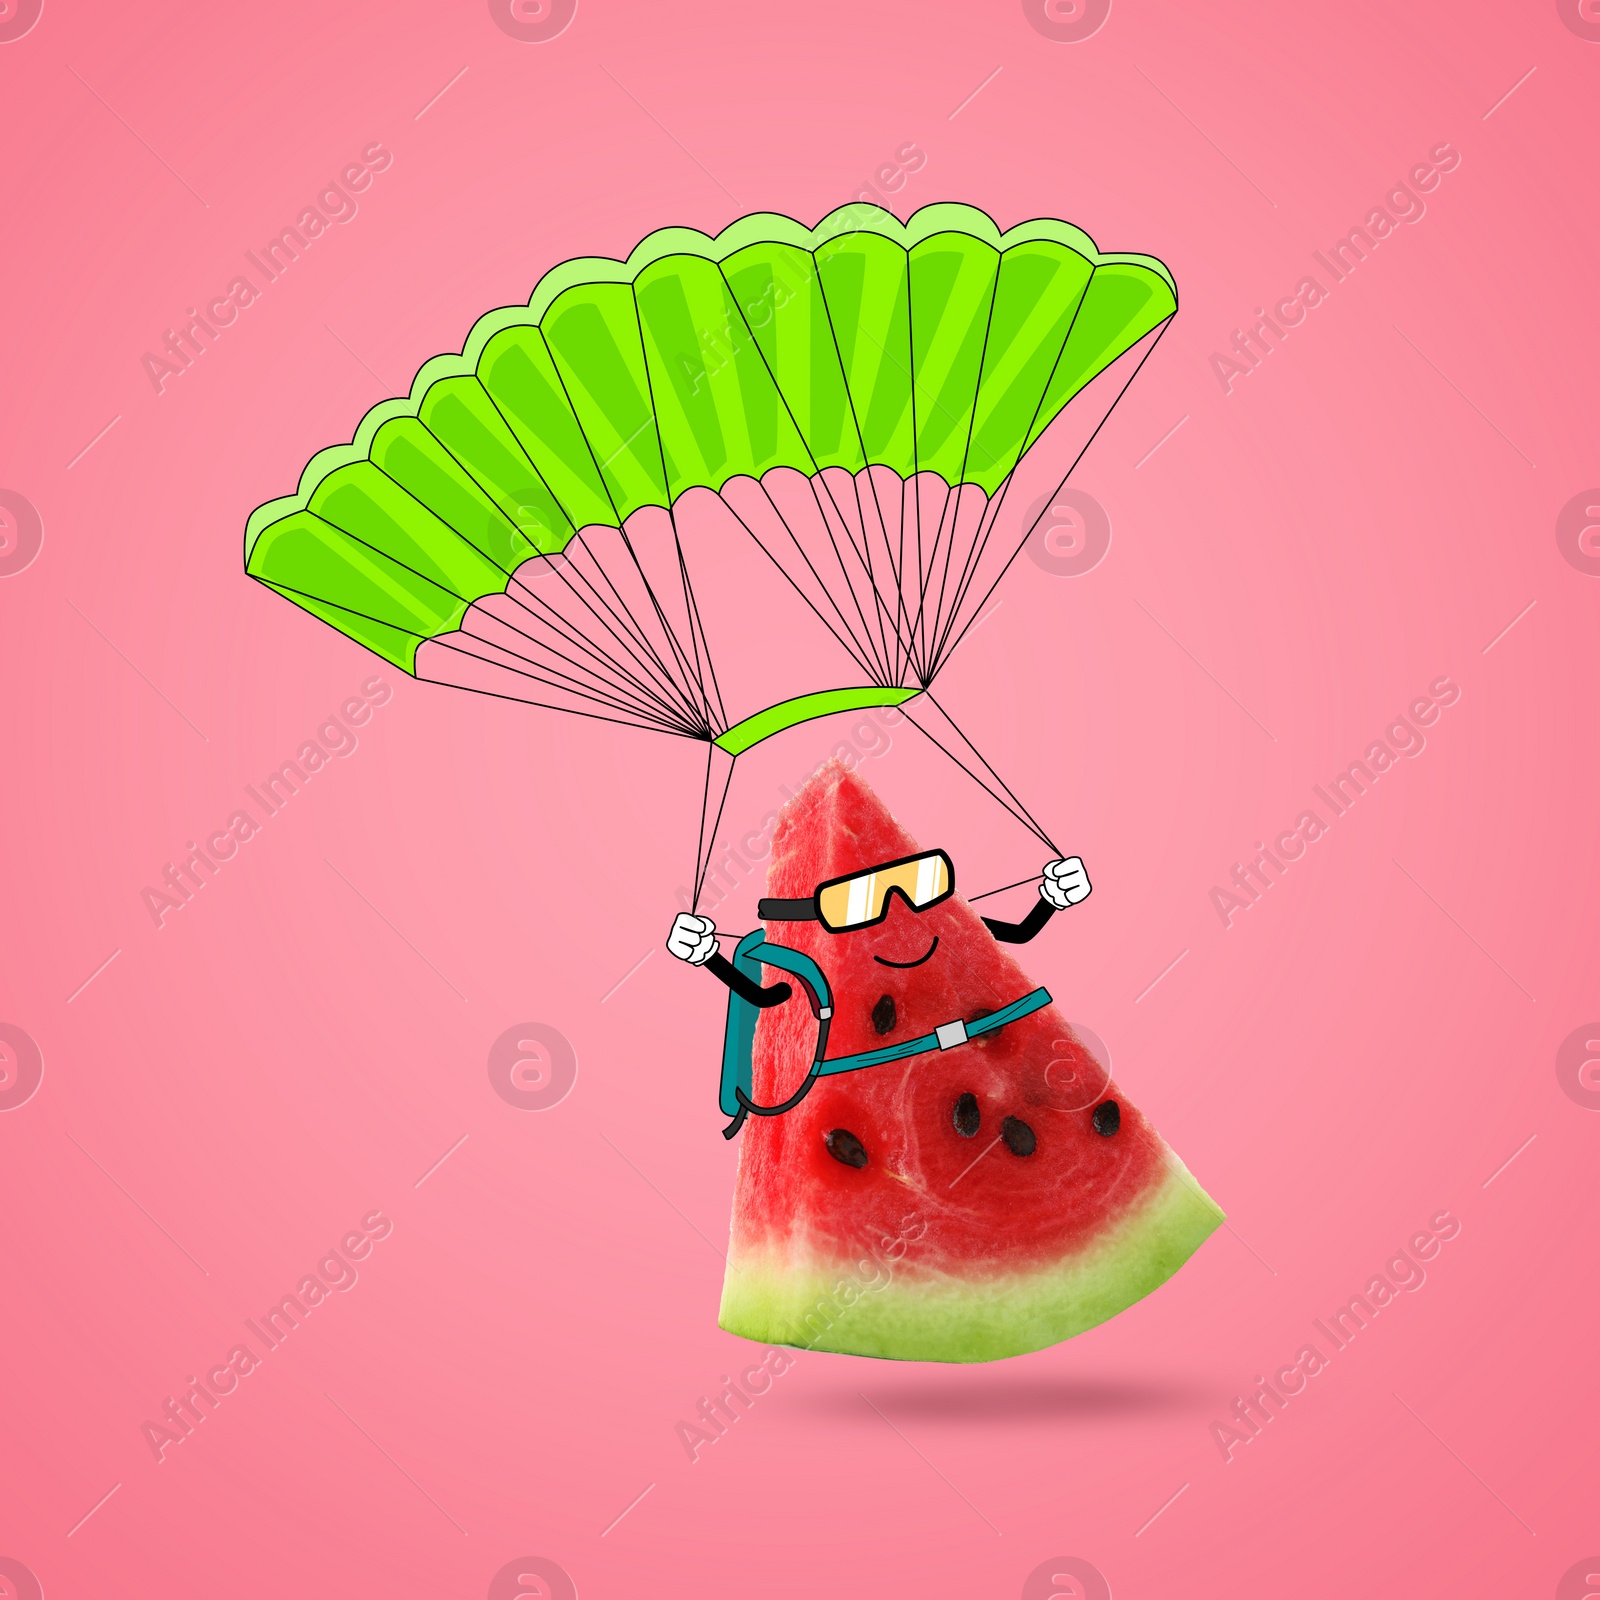 Image of Creative artwork. Watermelon with parachute landing on pink background. Slice of fruit with drawings